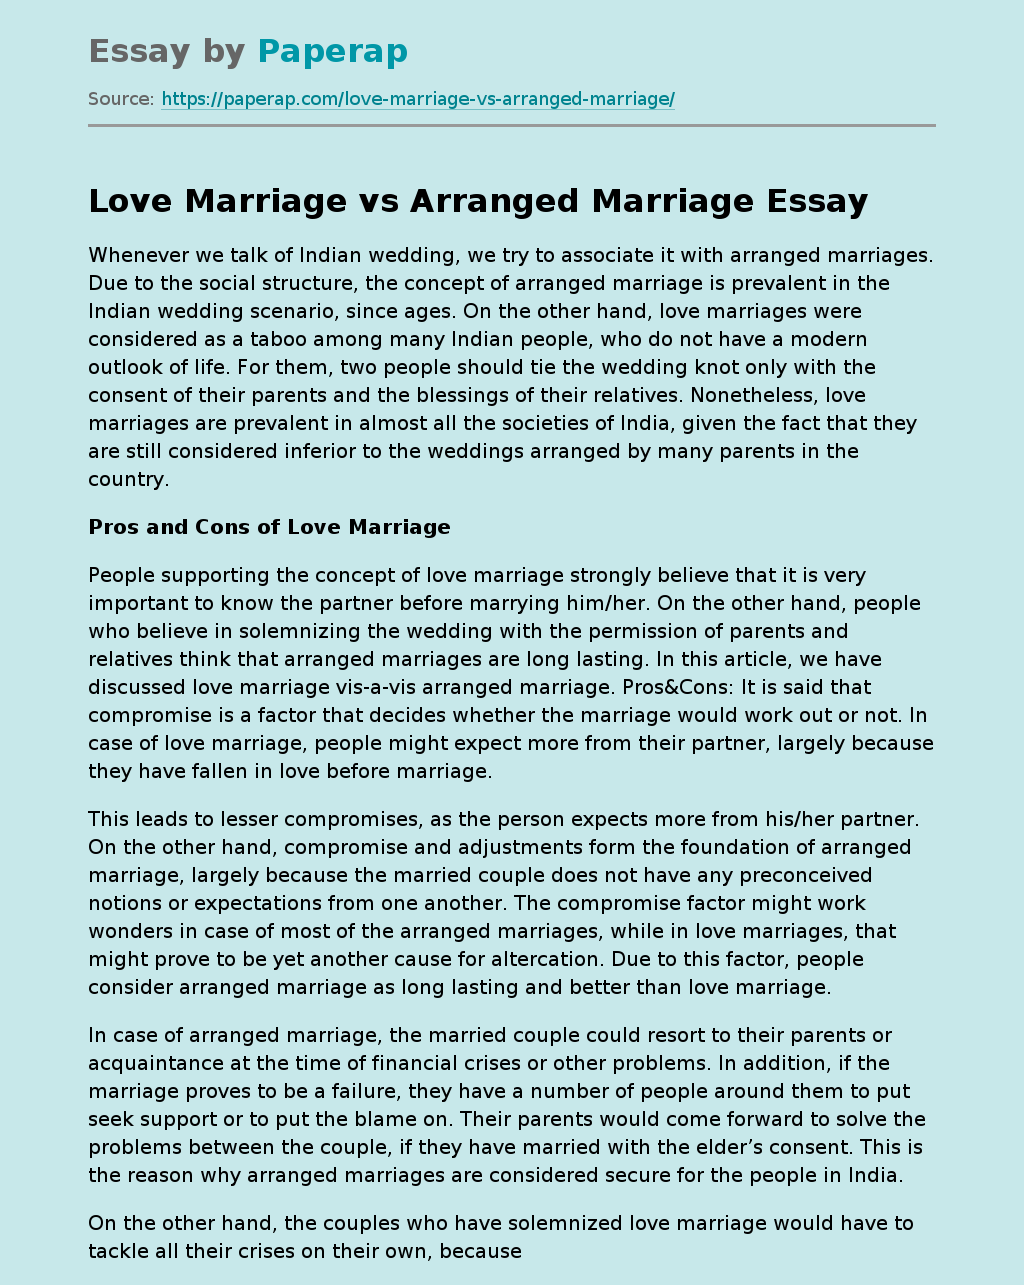 Love Marriage vs Arranged Marriage